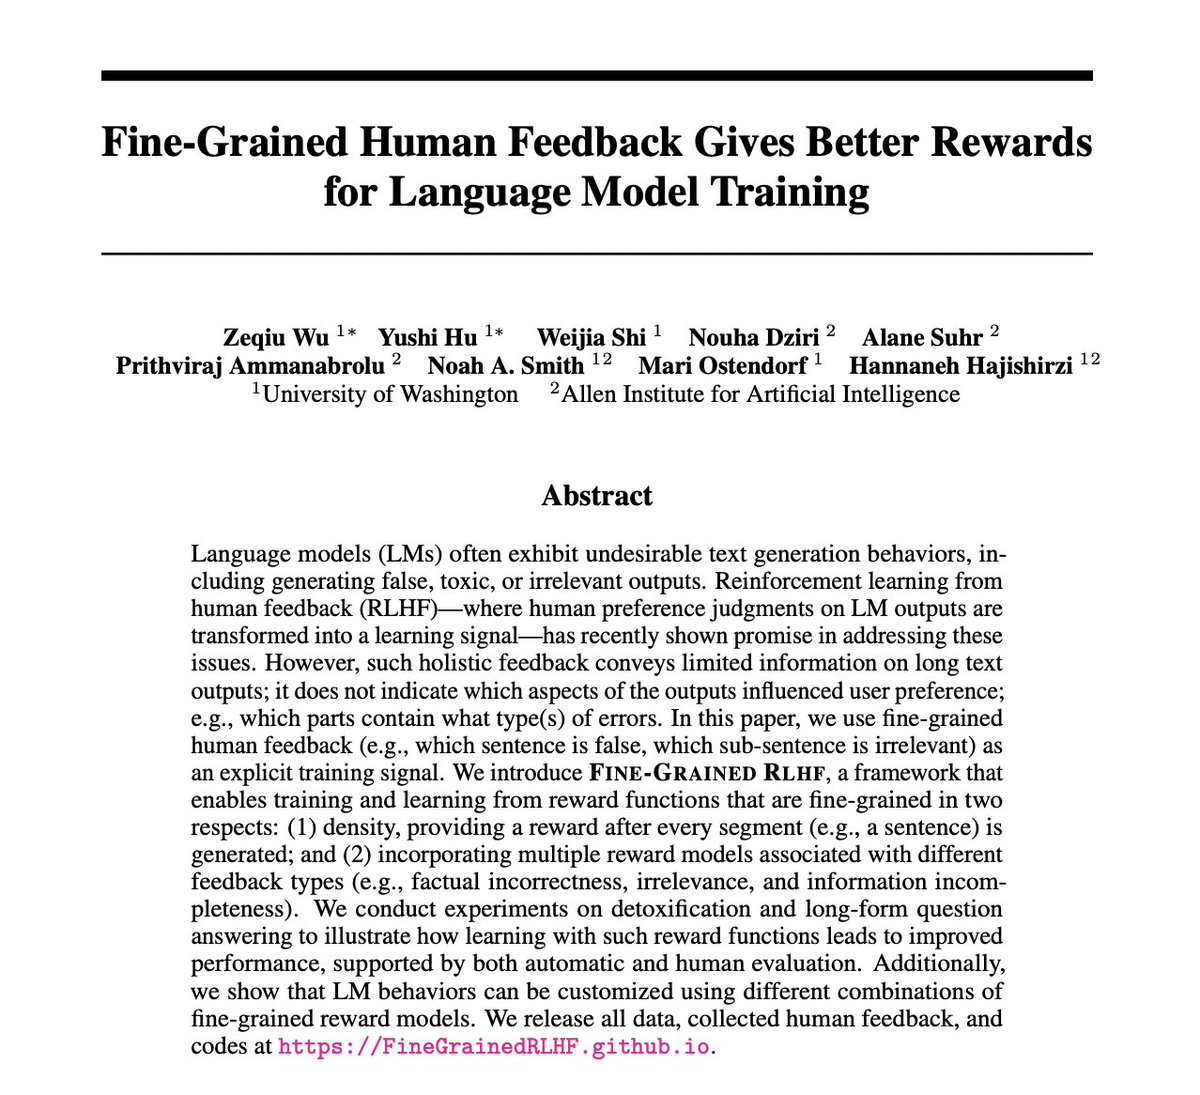 Fine-Grained Human Feedback Gives Better Rewards for Language Model Training

paper page: huggingface.co/papers/2306.01…

use fine-grained human feedback (e.g., which sentence is false, which sub-sentence is irrelevant) as an explicit training signal. We introduce Fine-Grained RLHF, a…